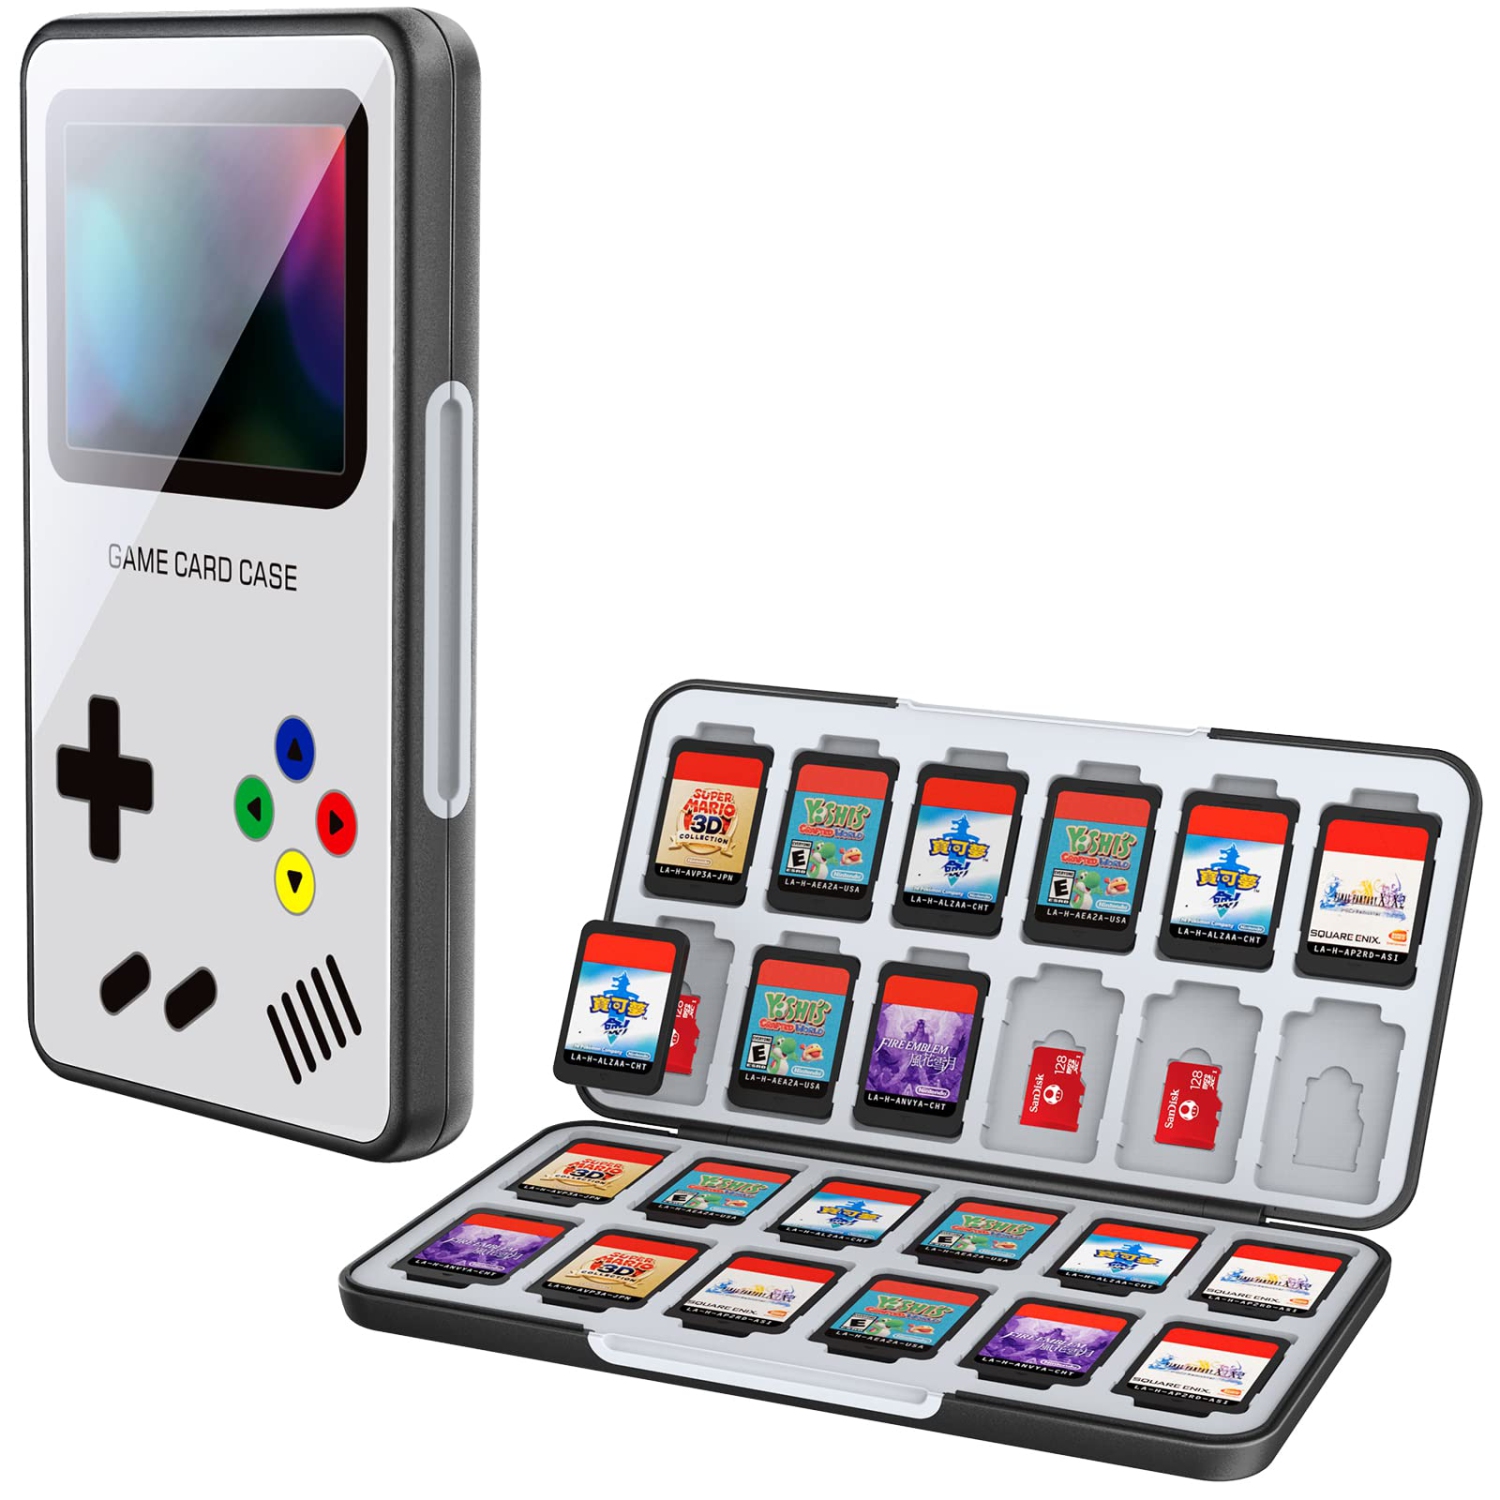 Game Card Case for Nintendo Switch Game Card or Micro SD Memory Cards,Custom Pattern Switch Game Memory Card Storage with 24 Game Card Slots and 24 Micro SD Card Slots.